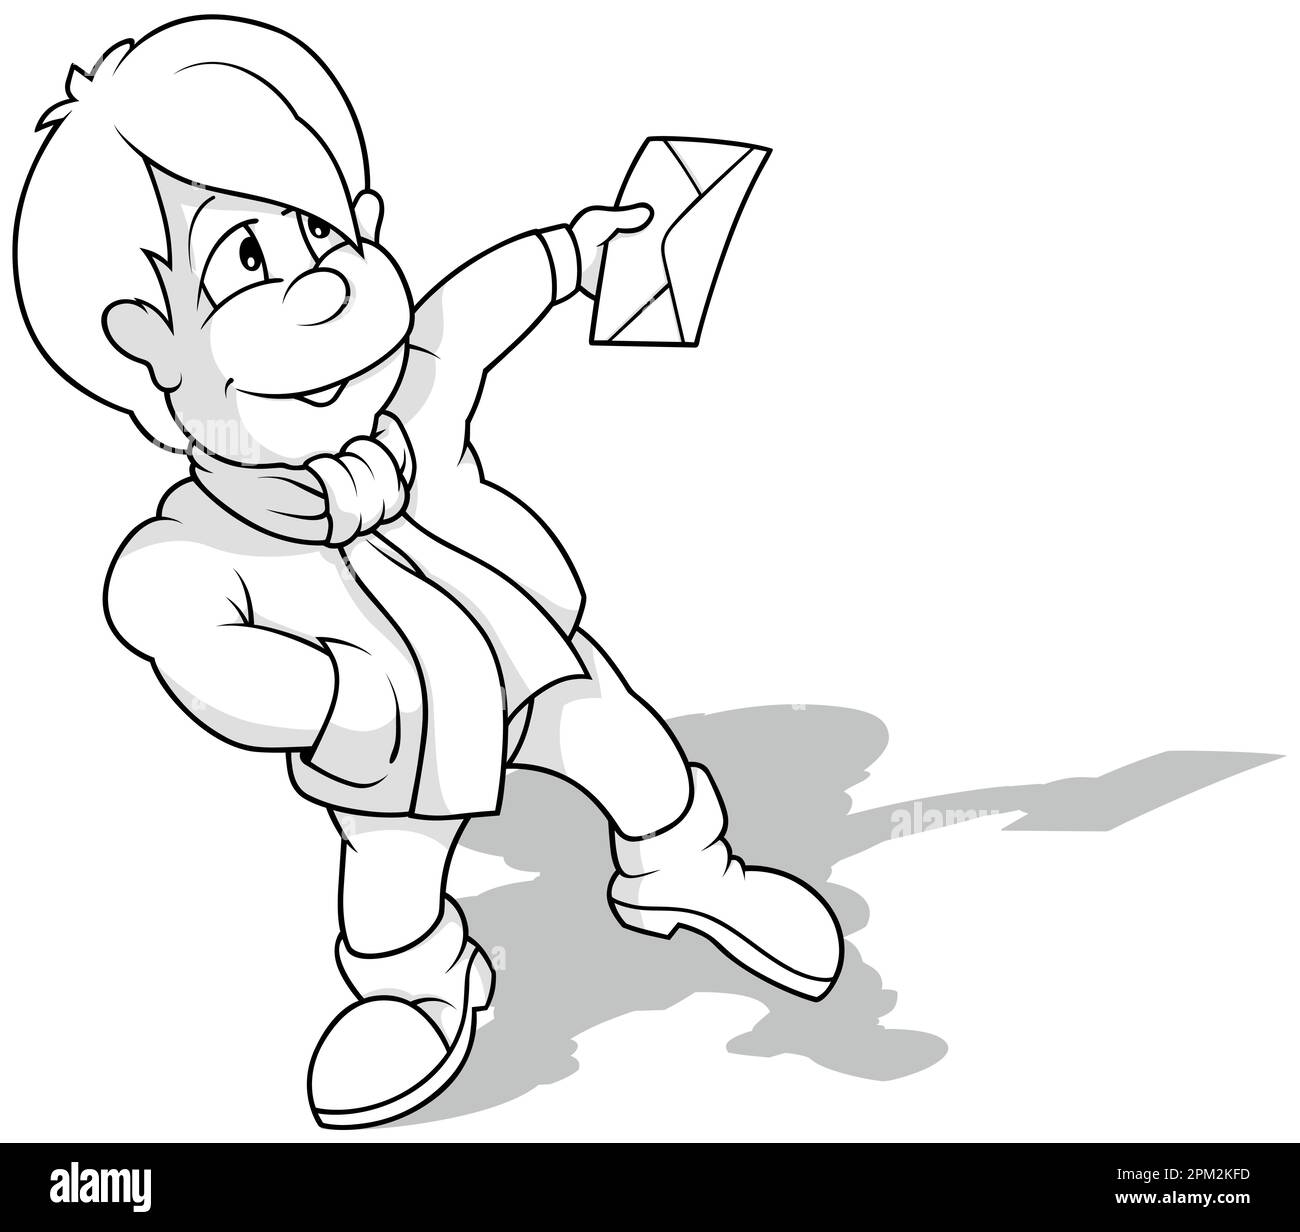 Drawing of a Boy in Winter Clothes Holding a Mail Envelope Stock Vector